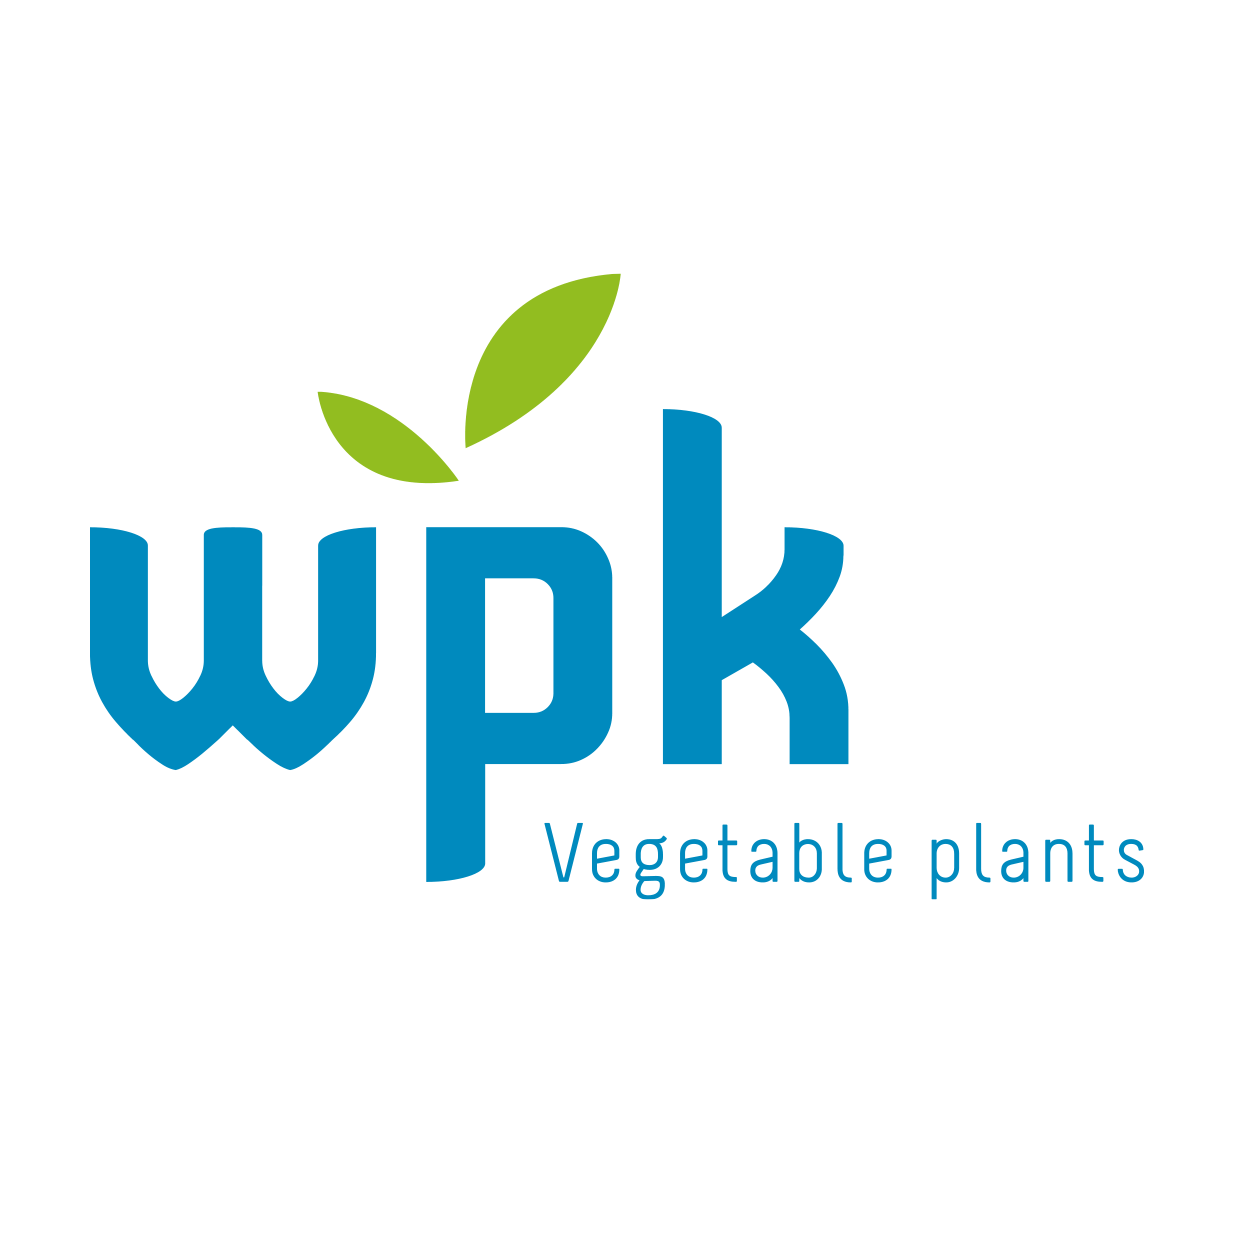 Limex trolley washer helps improve hygiene at WPK Vegetable Plants